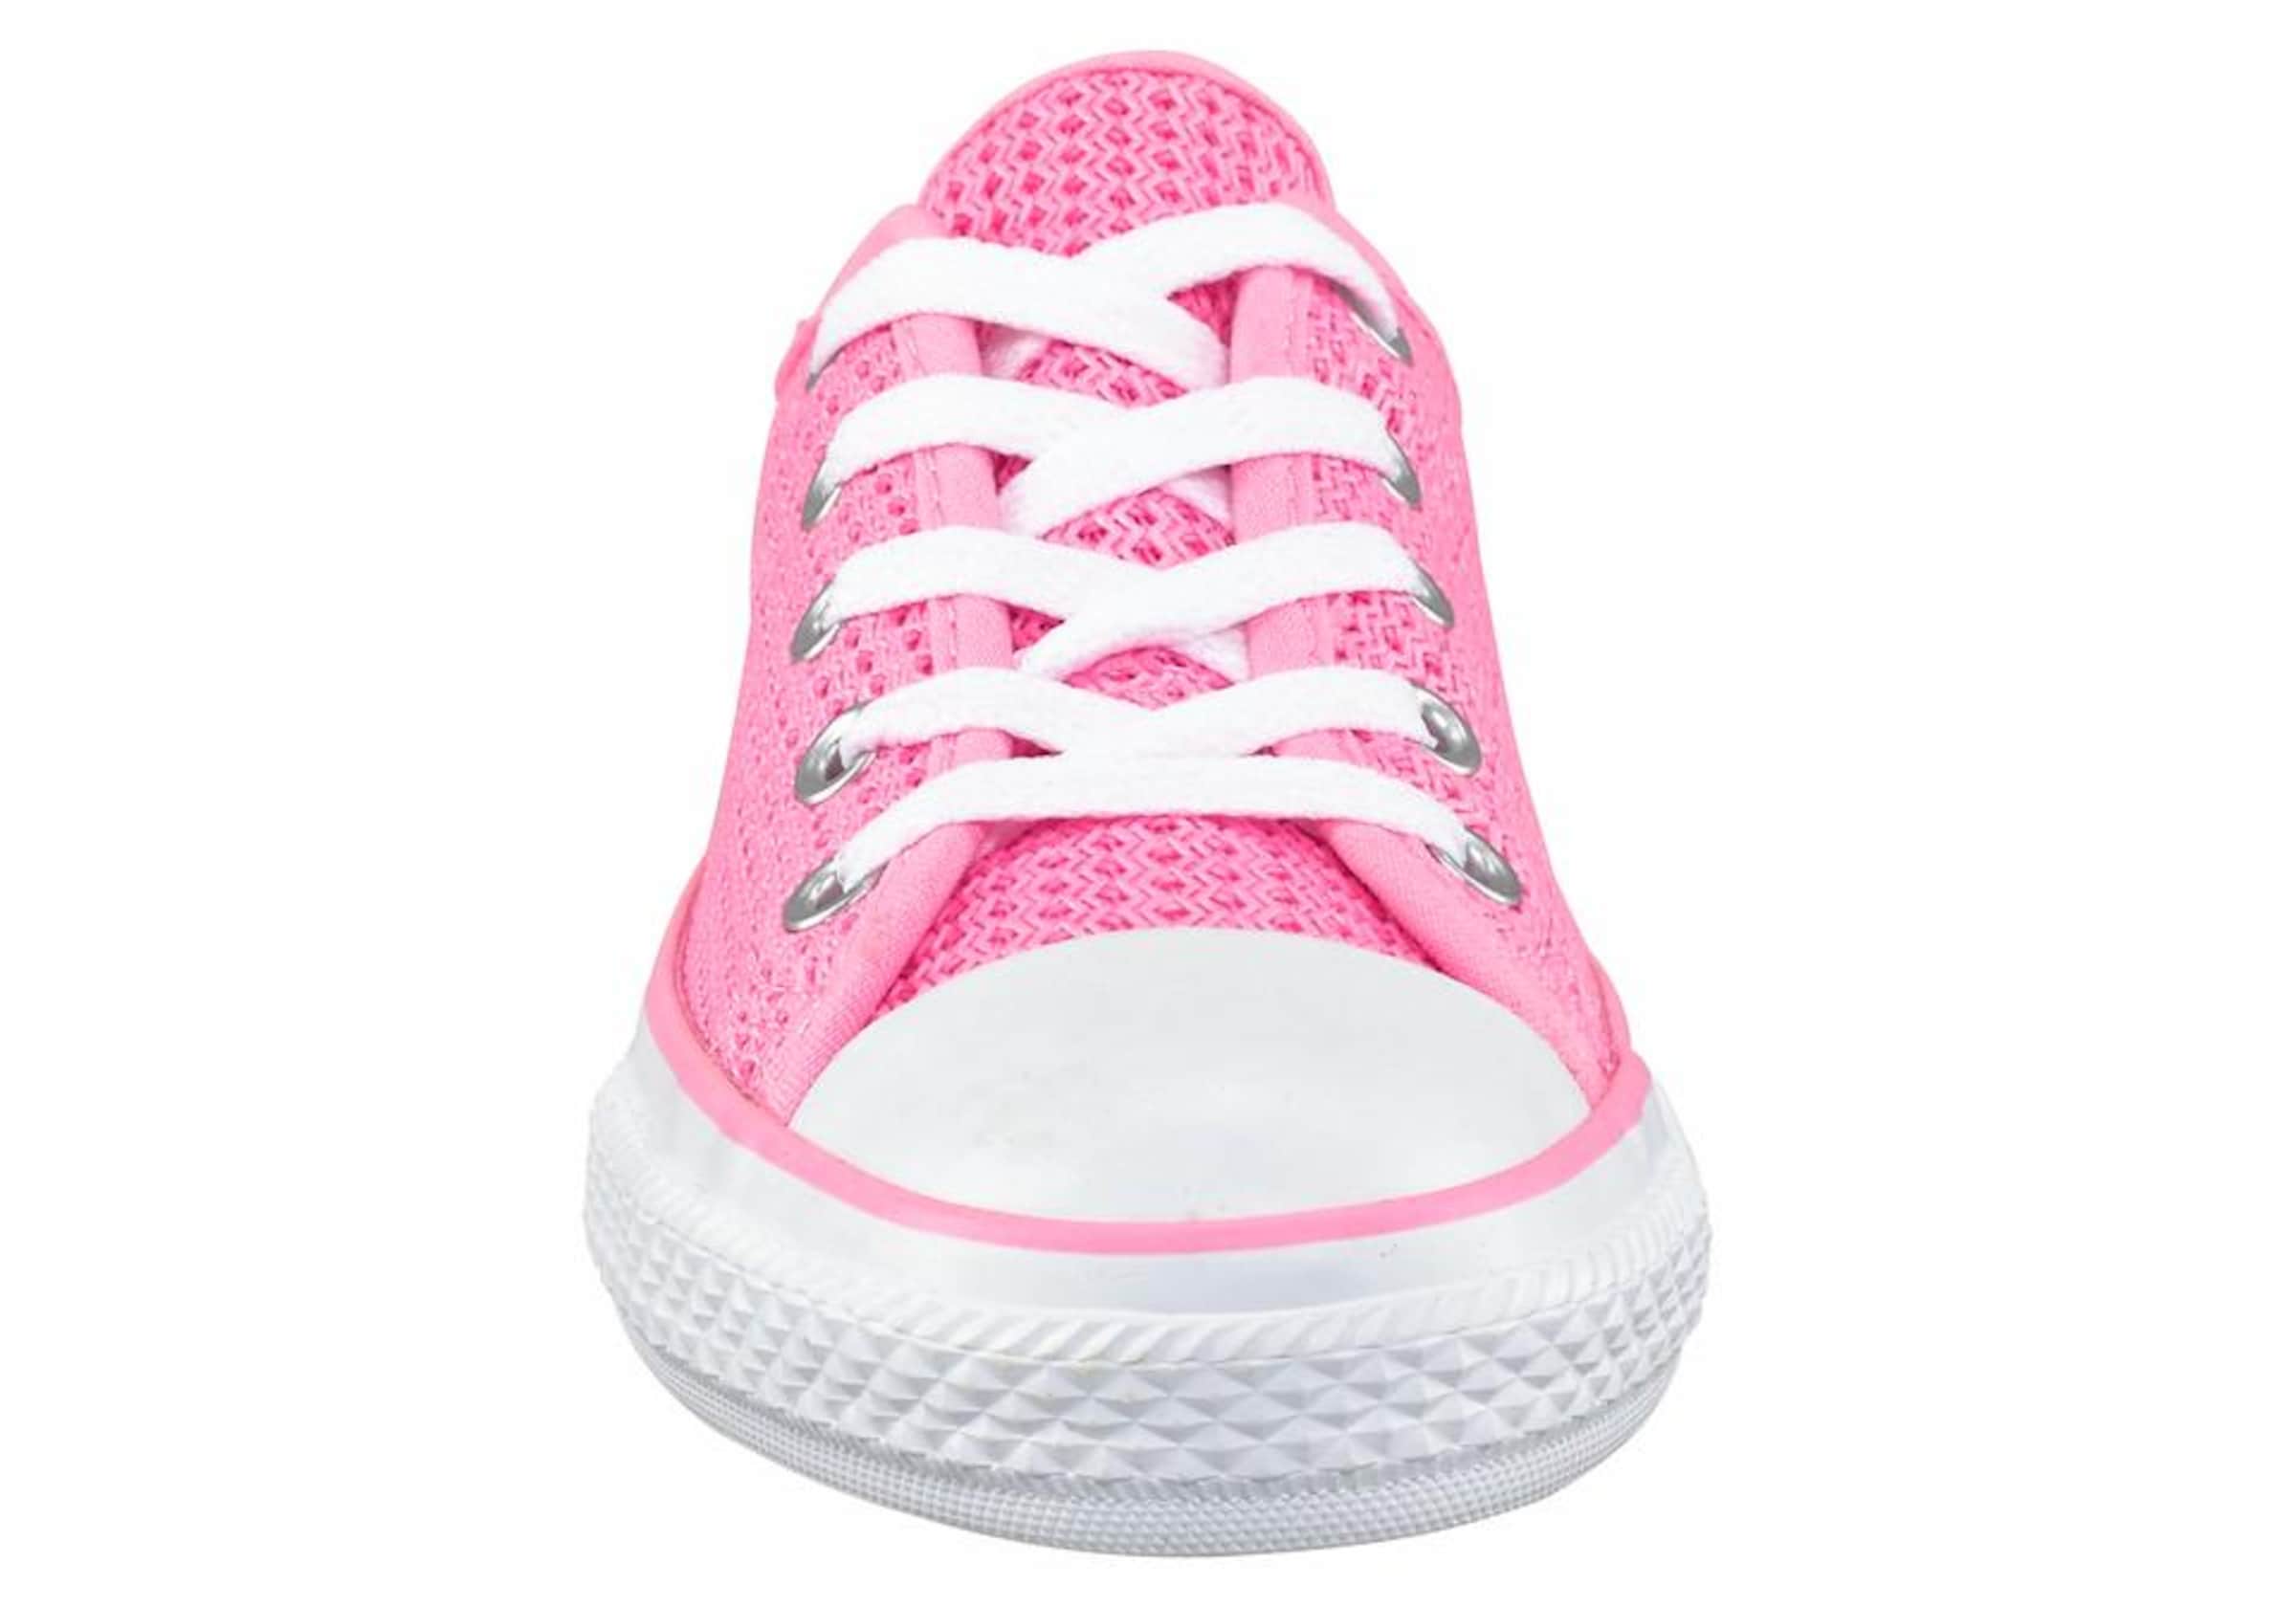 Kinder Teens (Gr. 140-176) CONVERSE Sneaker 'Chuck Taylor All Star Double Tongue' in Neonpink - RW93025